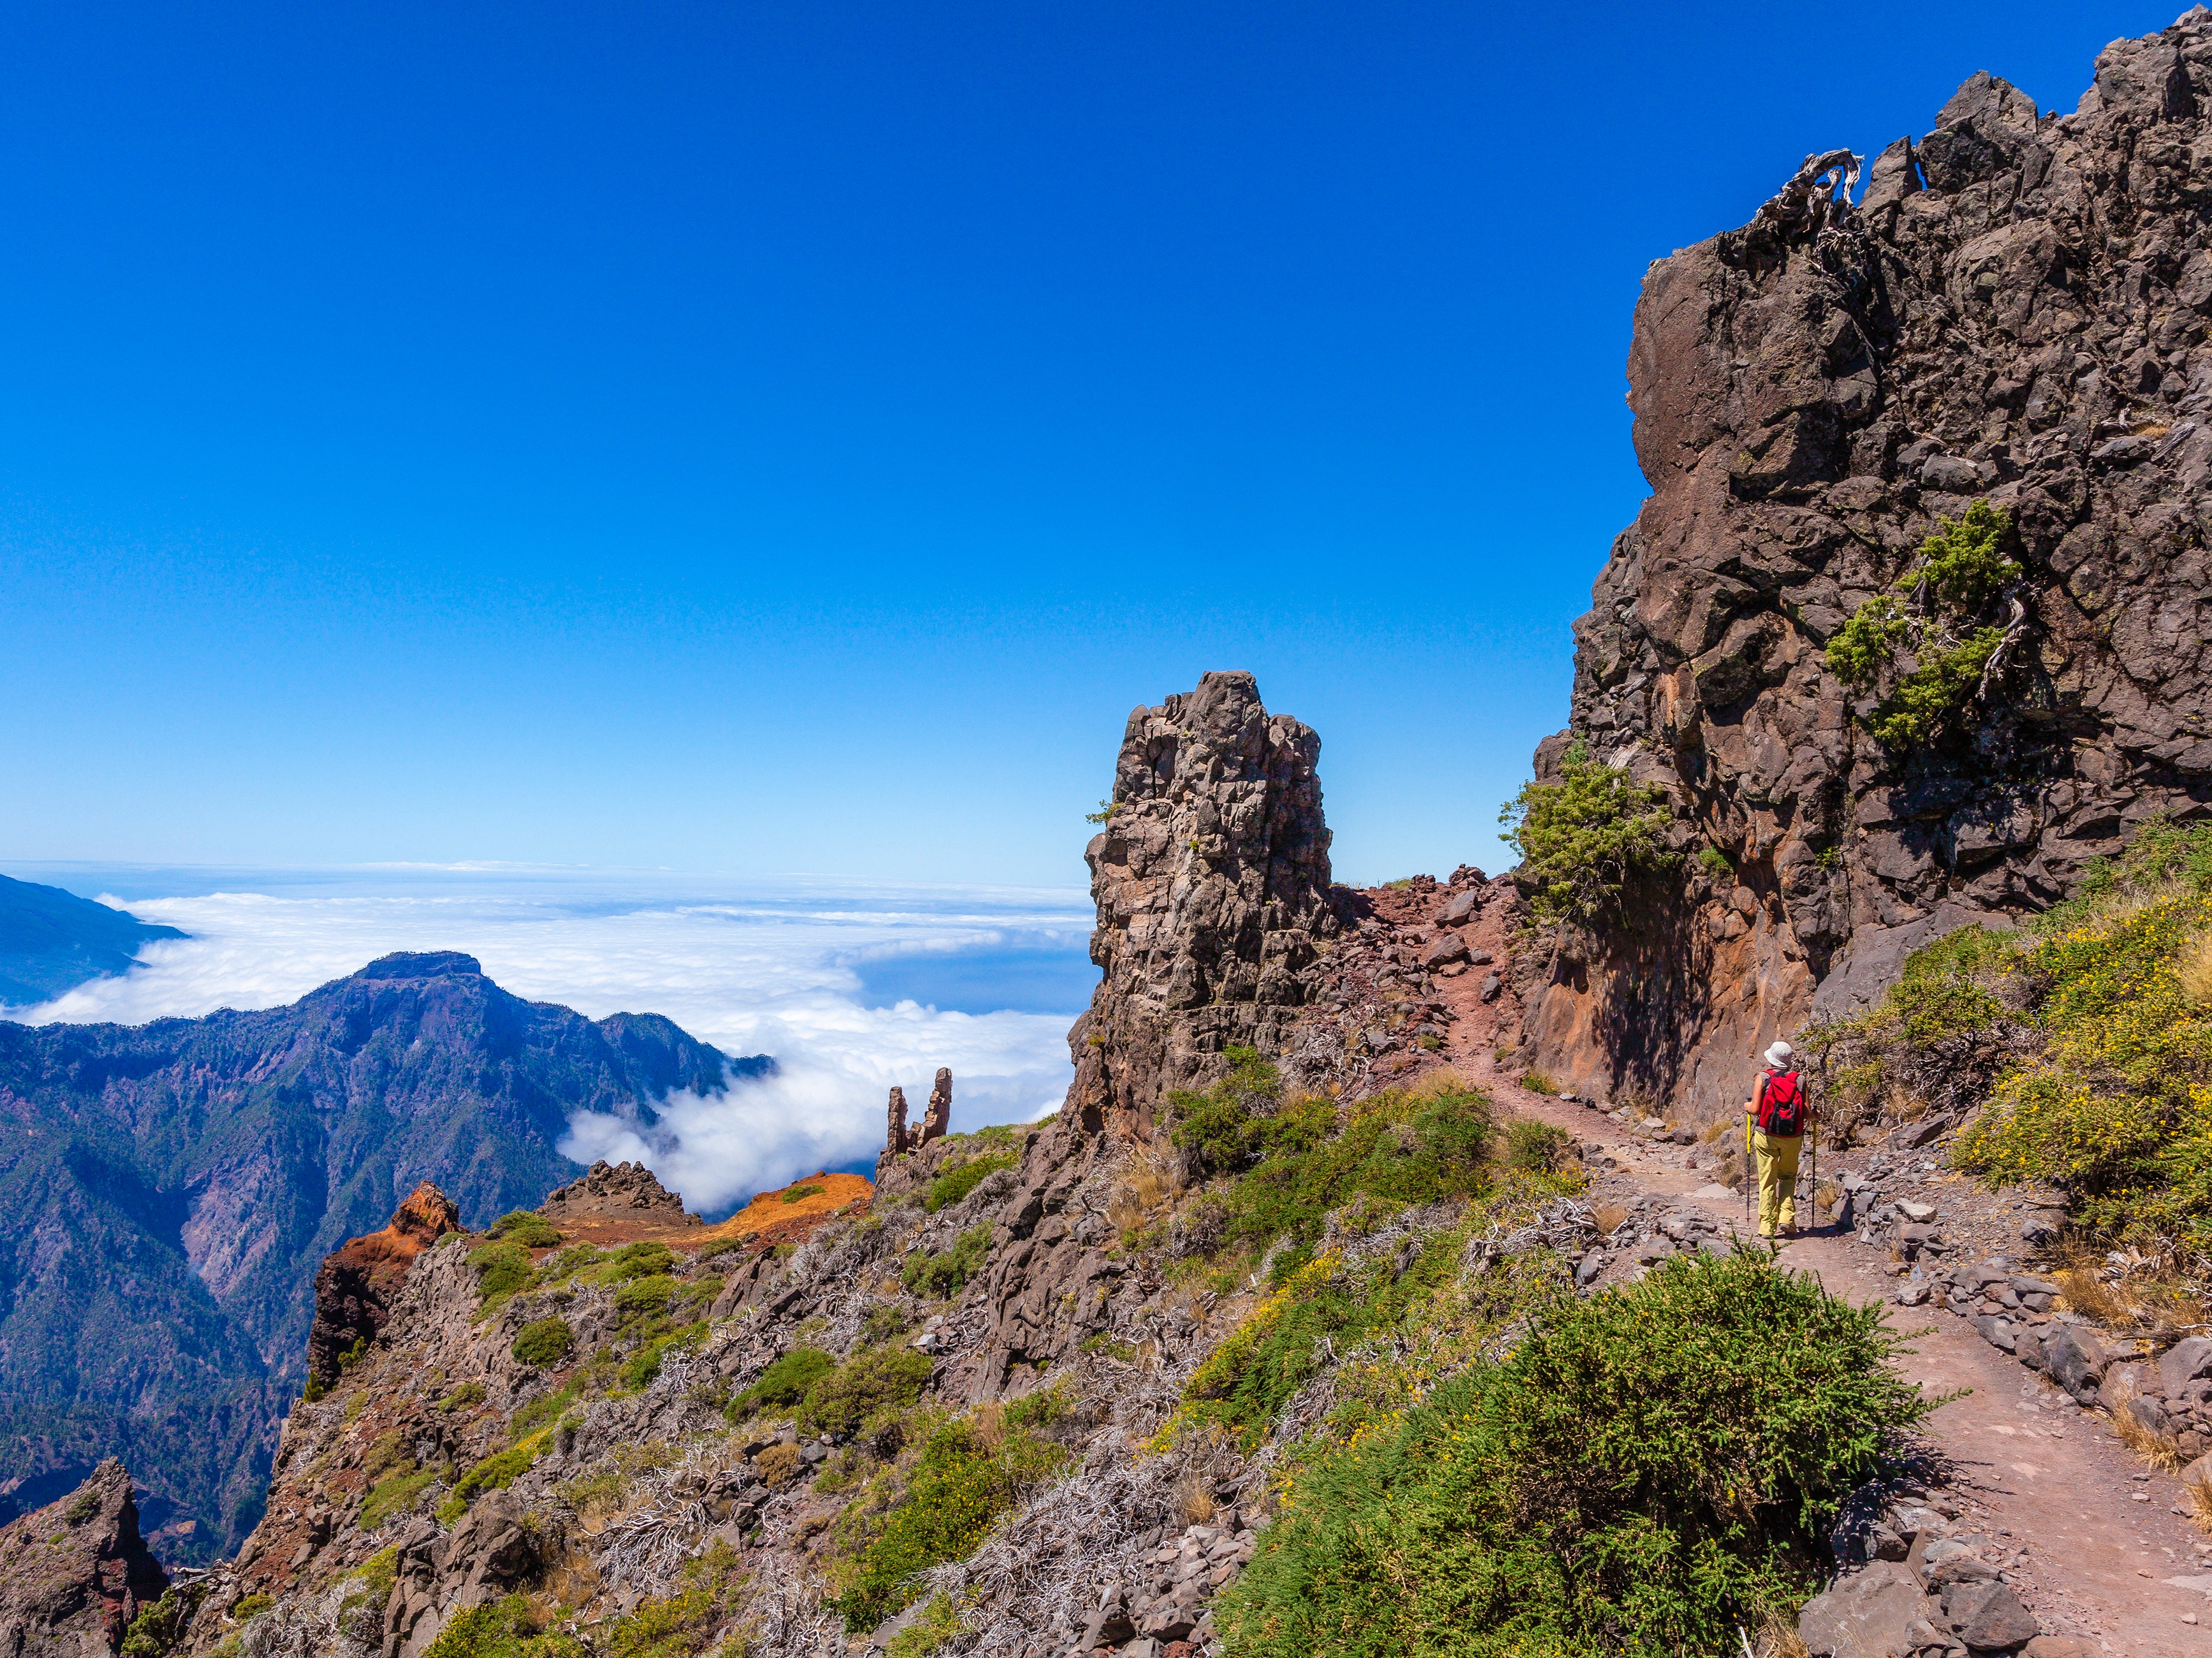 The Canary Islands are ideal for a December break